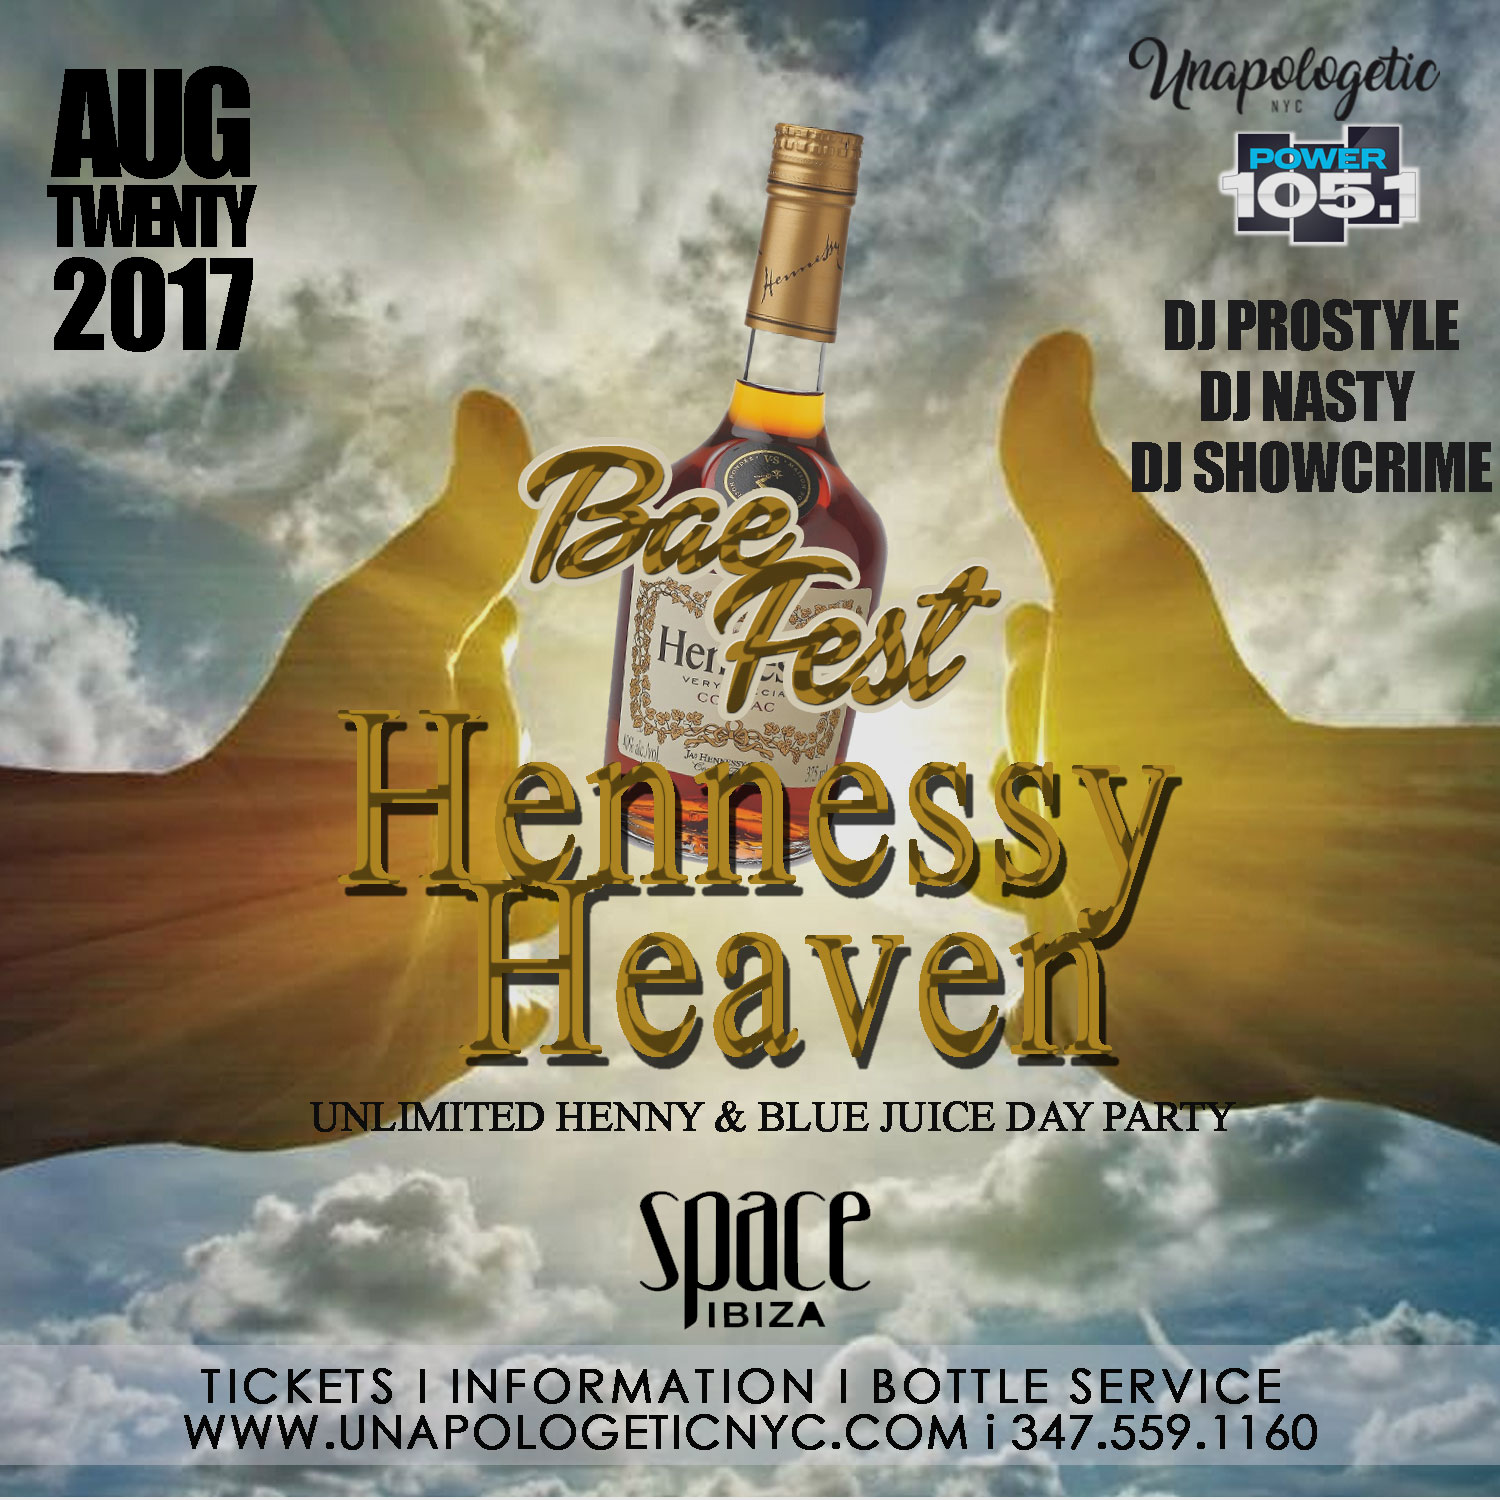 BAE FEST Hennessy Heaven Open bar Henny (unapologetic) Tickets, Sun